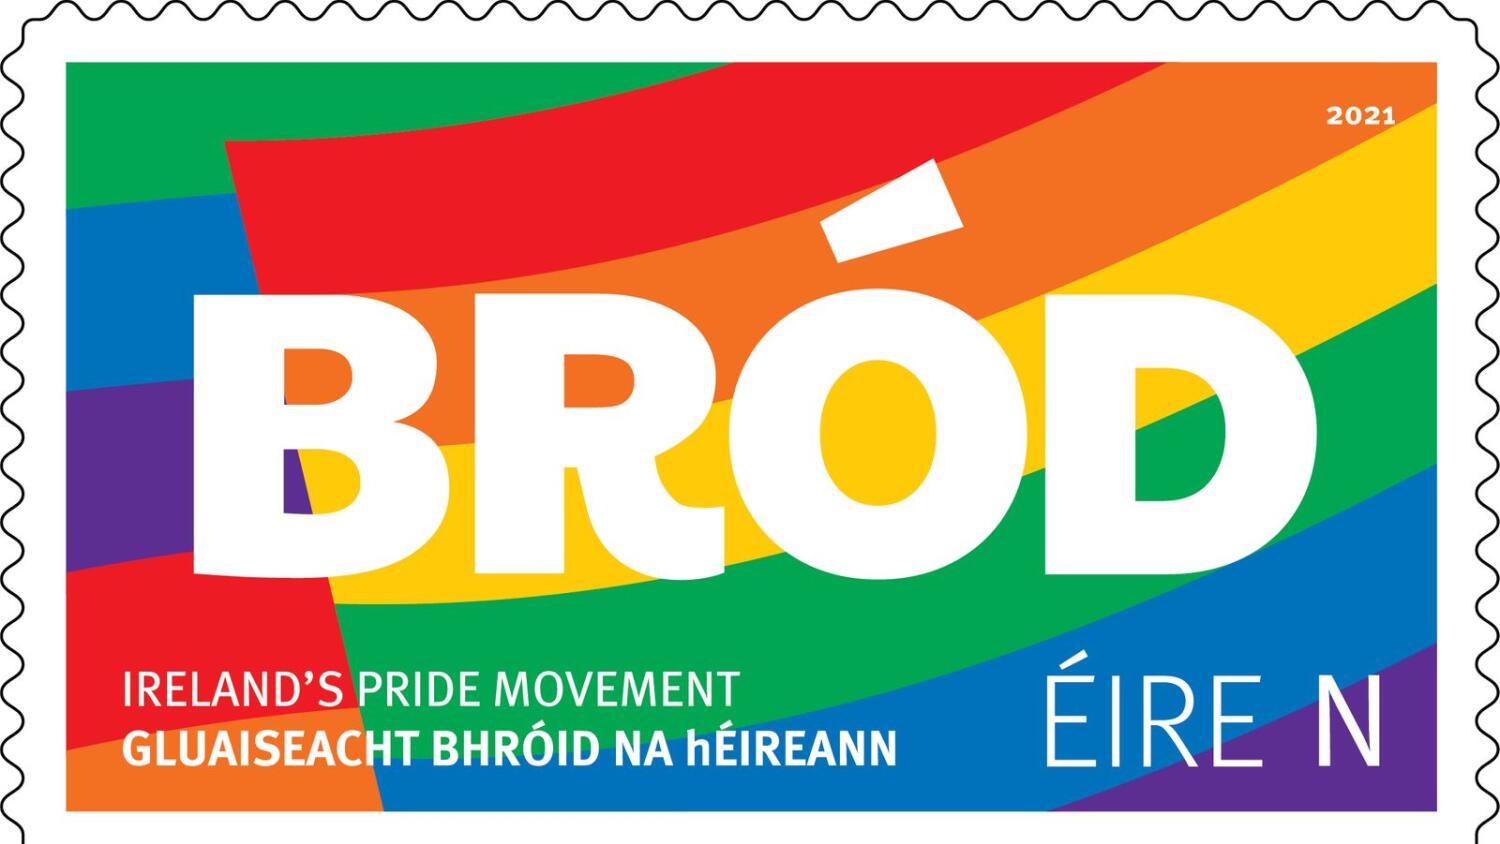 The Republic of Ireland is wishing citizens a happy Bród.